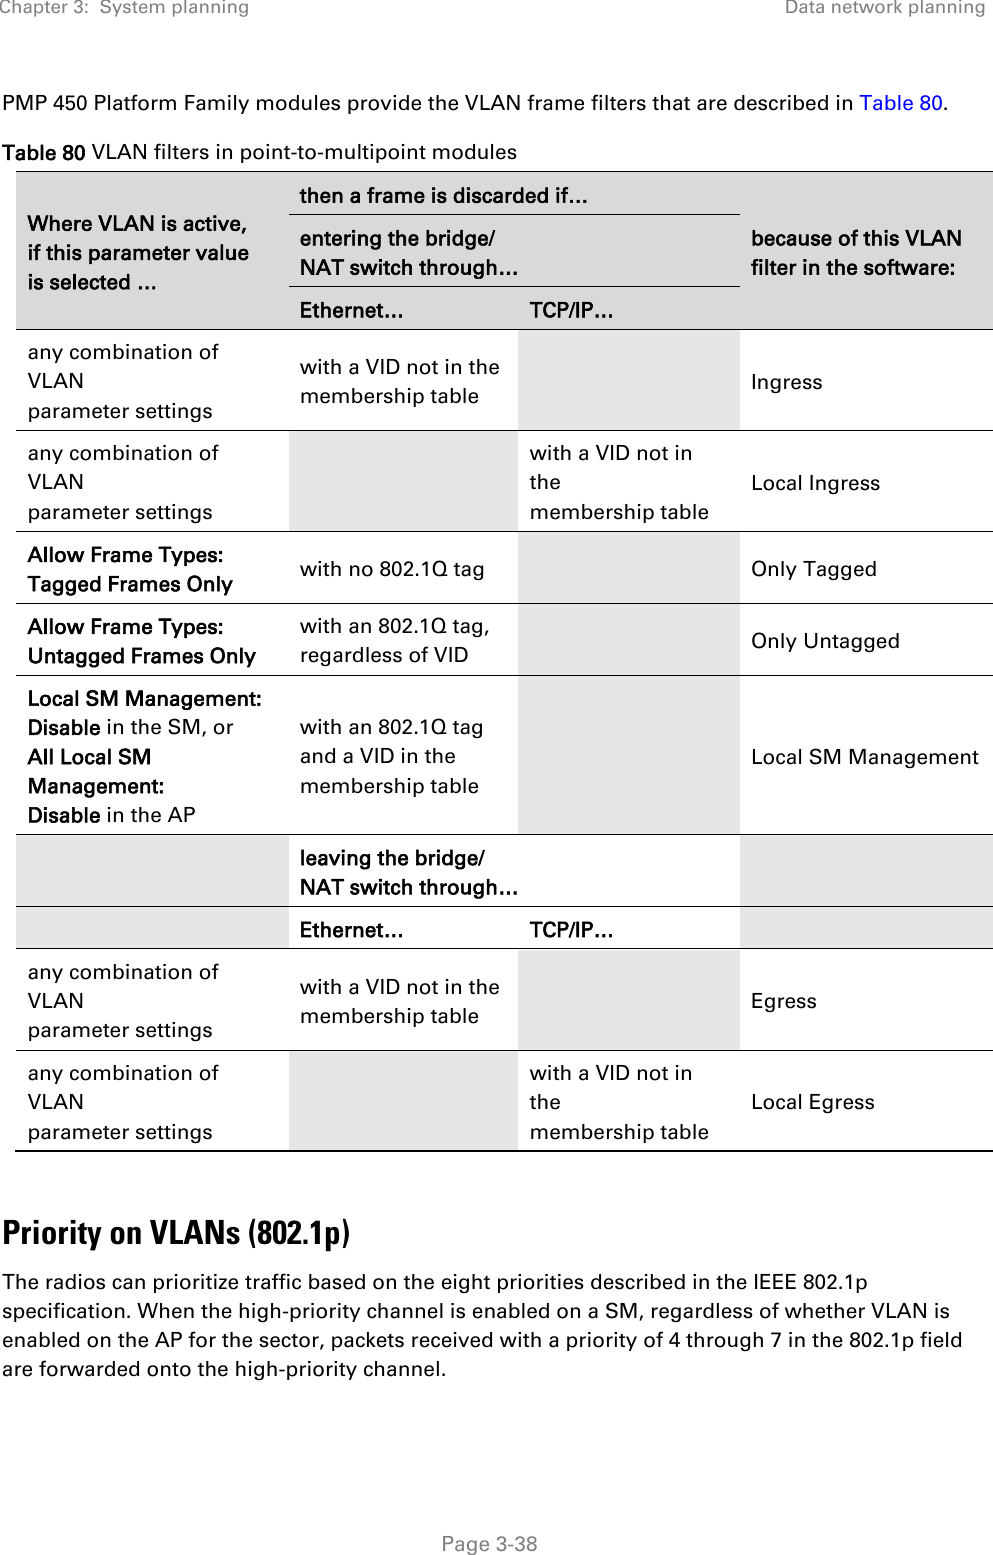 Chapter 3:  System planning Data network planning   Page 3-38 PMP 450 Platform Family modules provide the VLAN frame filters that are described in Table 80. Table 80 VLAN filters in point-to-multipoint modules Where VLAN is active, if this parameter value is selected … then a frame is discarded if… because of this VLAN filter in the software: entering the bridge/  NAT switch through… Ethernet… TCP/IP… any combination of VLAN parameter settings with a VID not in the membership table   Ingress any combination of VLAN parameter settings  with a VID not in the membership table Local Ingress Allow Frame Types: Tagged Frames Only with no 802.1Q tag    Only Tagged Allow Frame Types: Untagged Frames Only with an 802.1Q tag, regardless of VID  Only Untagged Local SM Management: Disable in the SM, or All Local SM Management: Disable in the AP with an 802.1Q tag and a VID in the membership table  Local SM Management  leaving the bridge/ NAT switch through…   Ethernet… TCP/IP…  any combination of VLAN parameter settings with a VID not in the membership table   Egress any combination of VLAN parameter settings  with a VID not in the membership table Local Egress  Priority on VLANs (802.1p) The radios can prioritize traffic based on the eight priorities described in the IEEE 802.1p specification. When the high-priority channel is enabled on a SM, regardless of whether VLAN is enabled on the AP for the sector, packets received with a priority of 4 through 7 in the 802.1p field are forwarded onto the high-priority channel. 